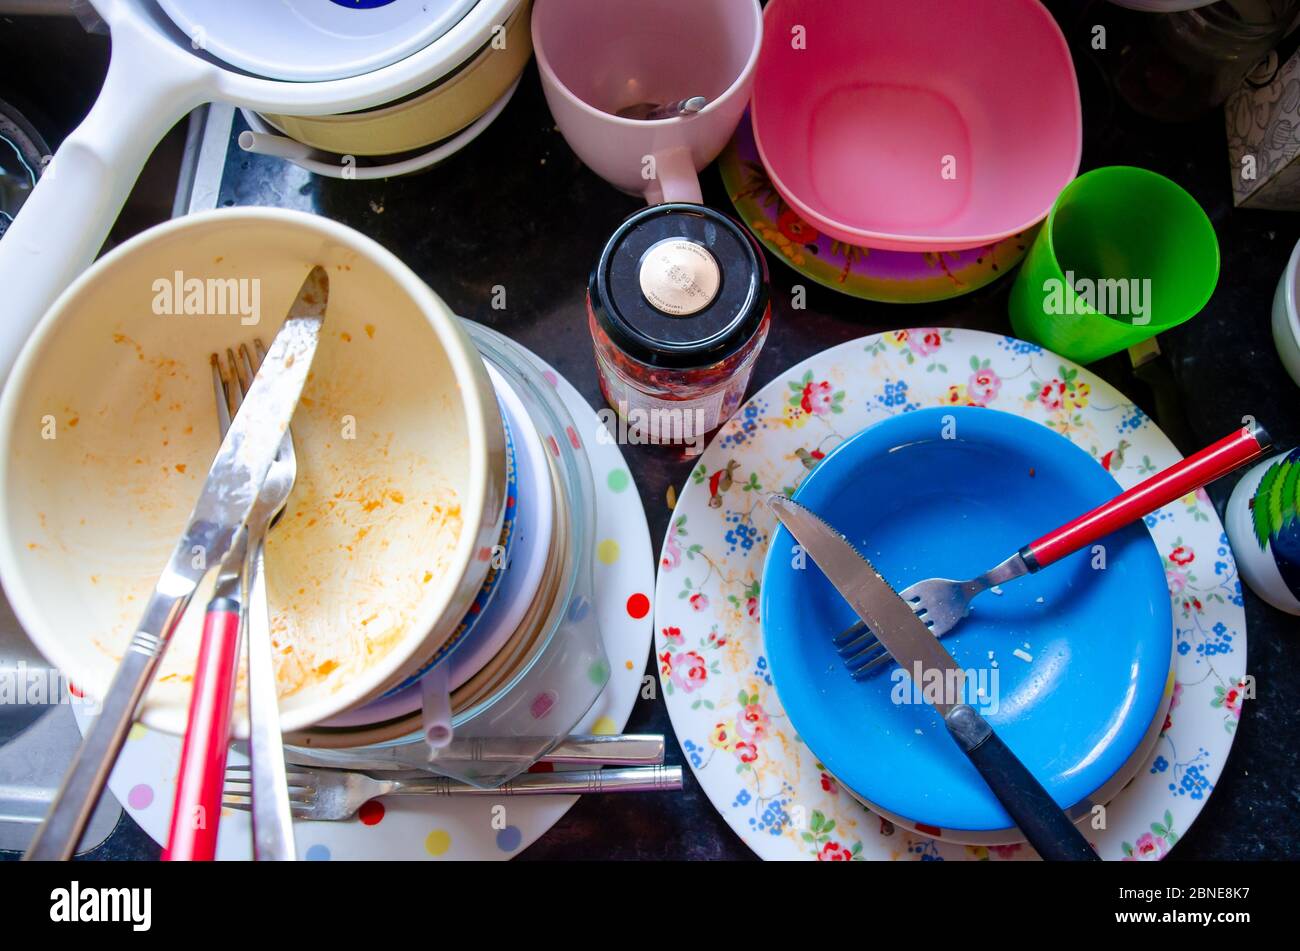 Washing up - Plates, dishes, knives, forks, cups stacked on a kitchen worktop ready to be cleaned. Stock Photo